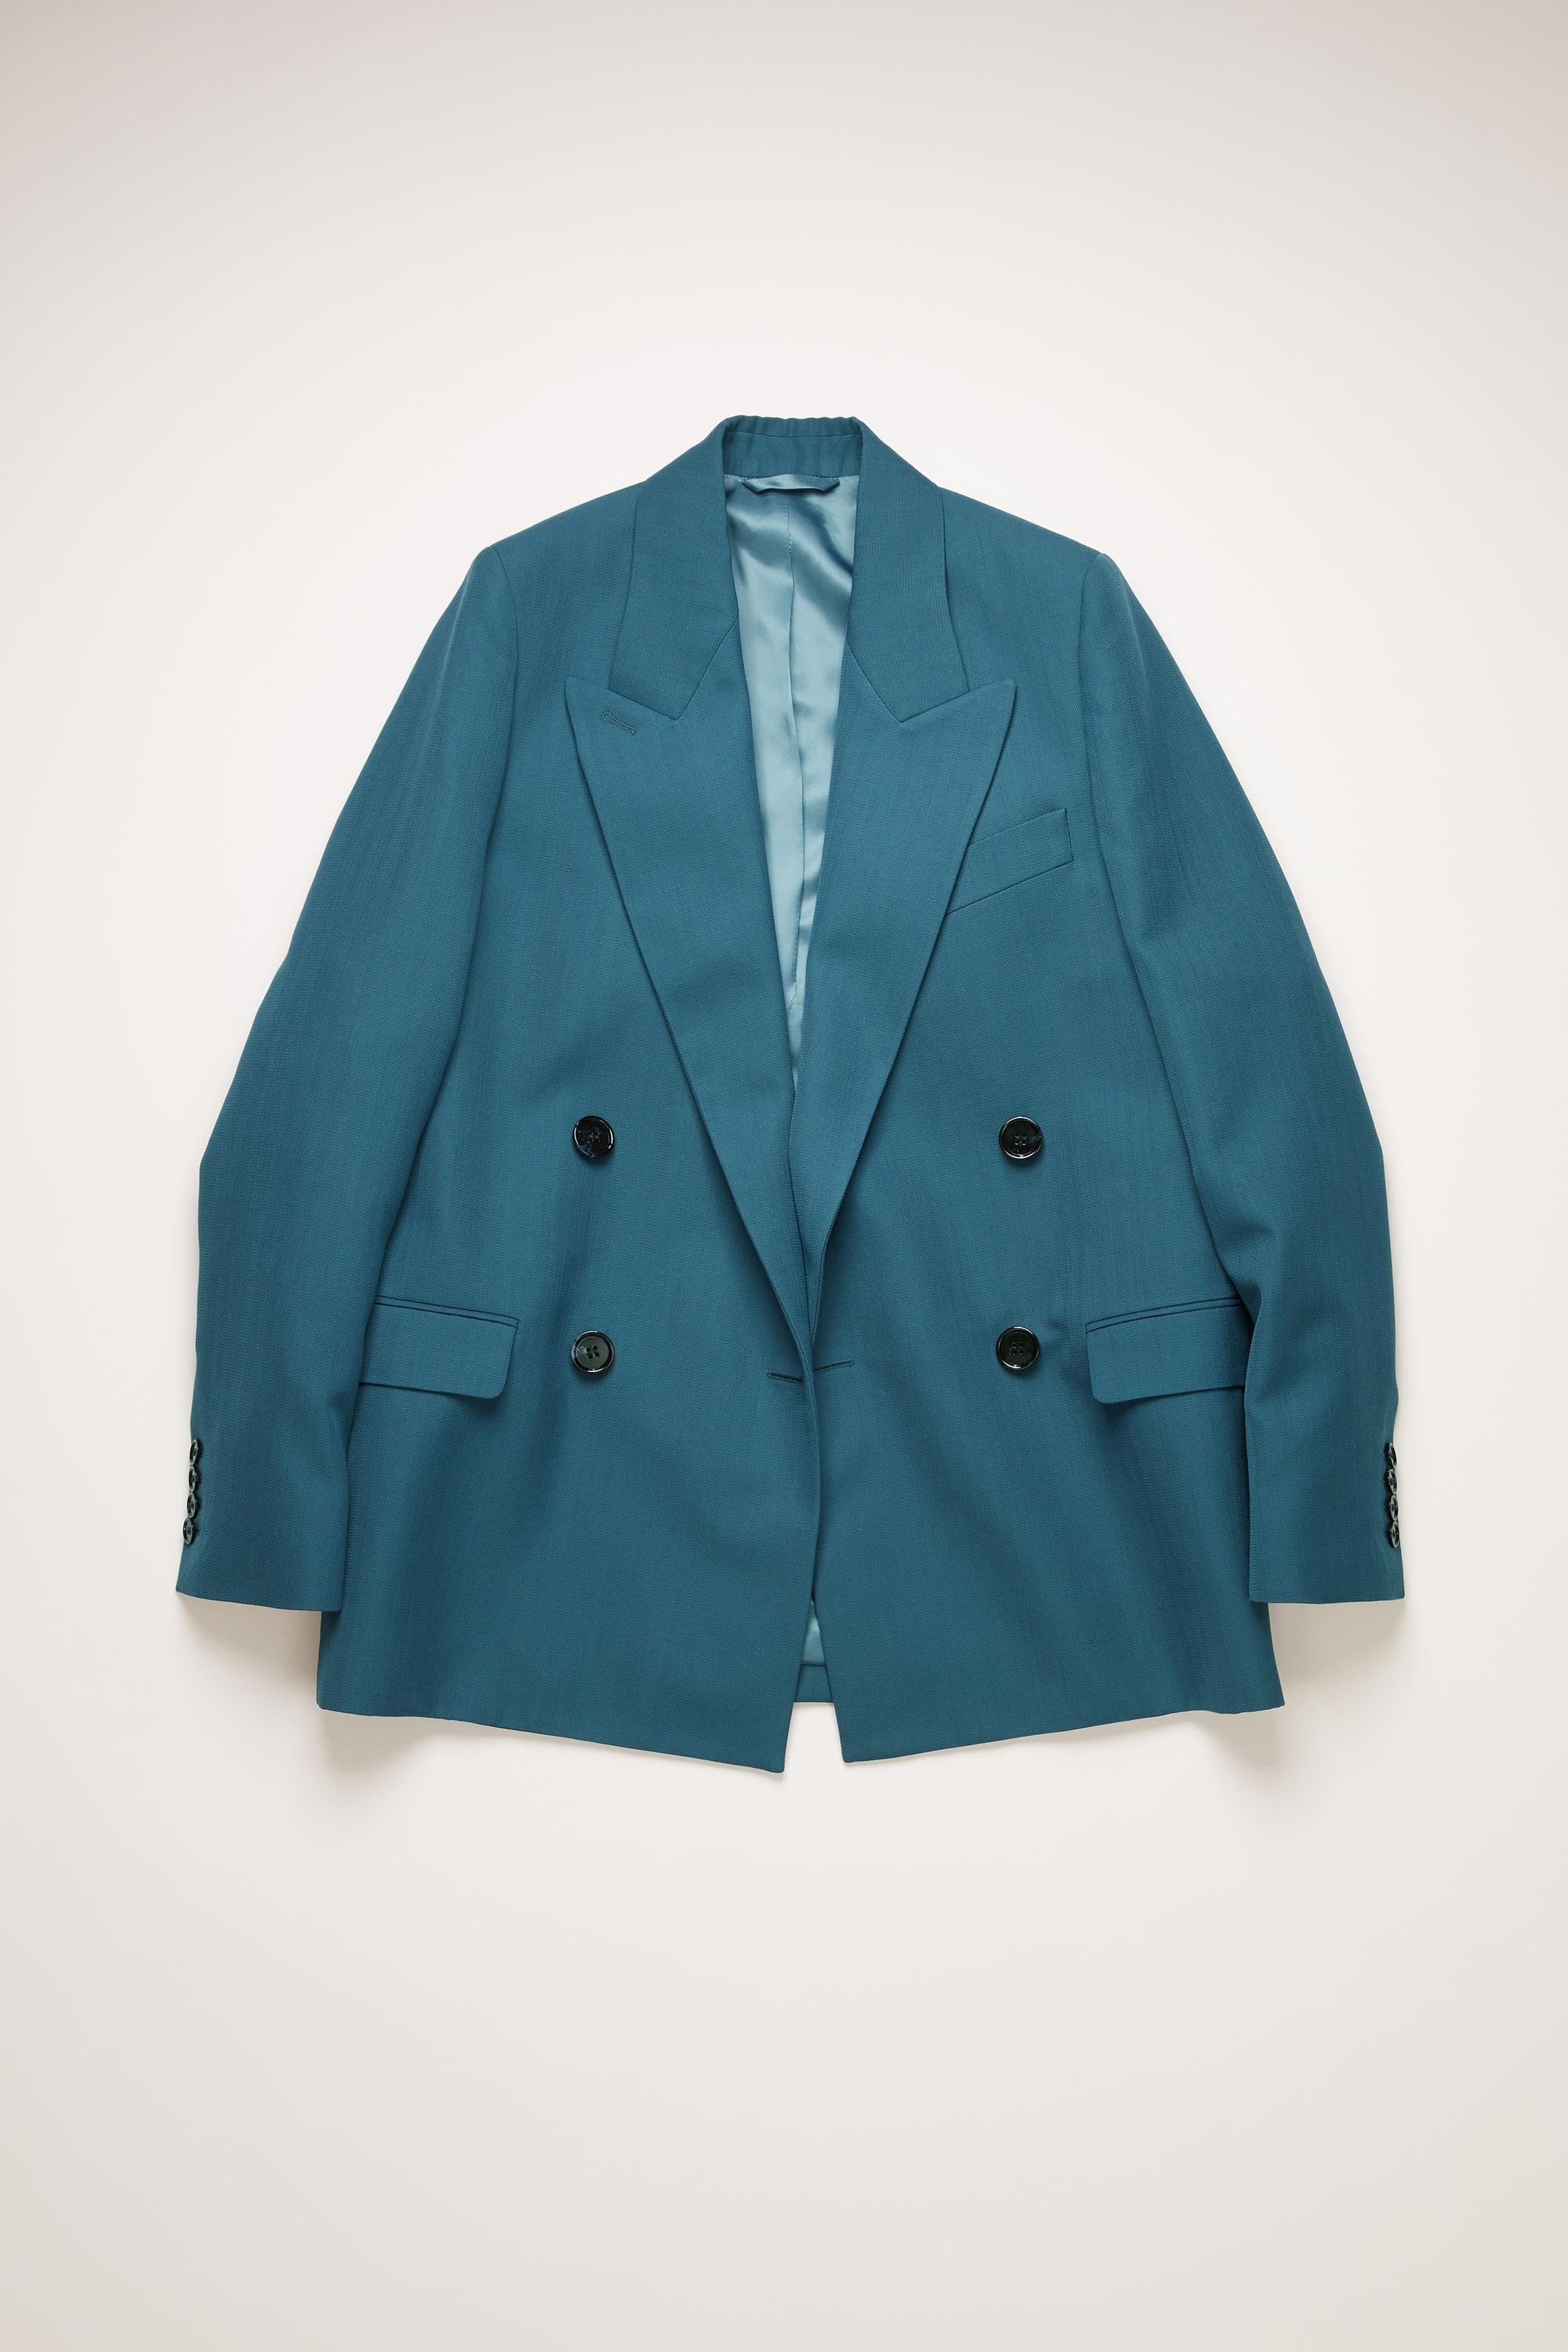 Acne Studios Fn-wn-suit000175 Teal Blue Double-breasted Suit Jacket | Lyst